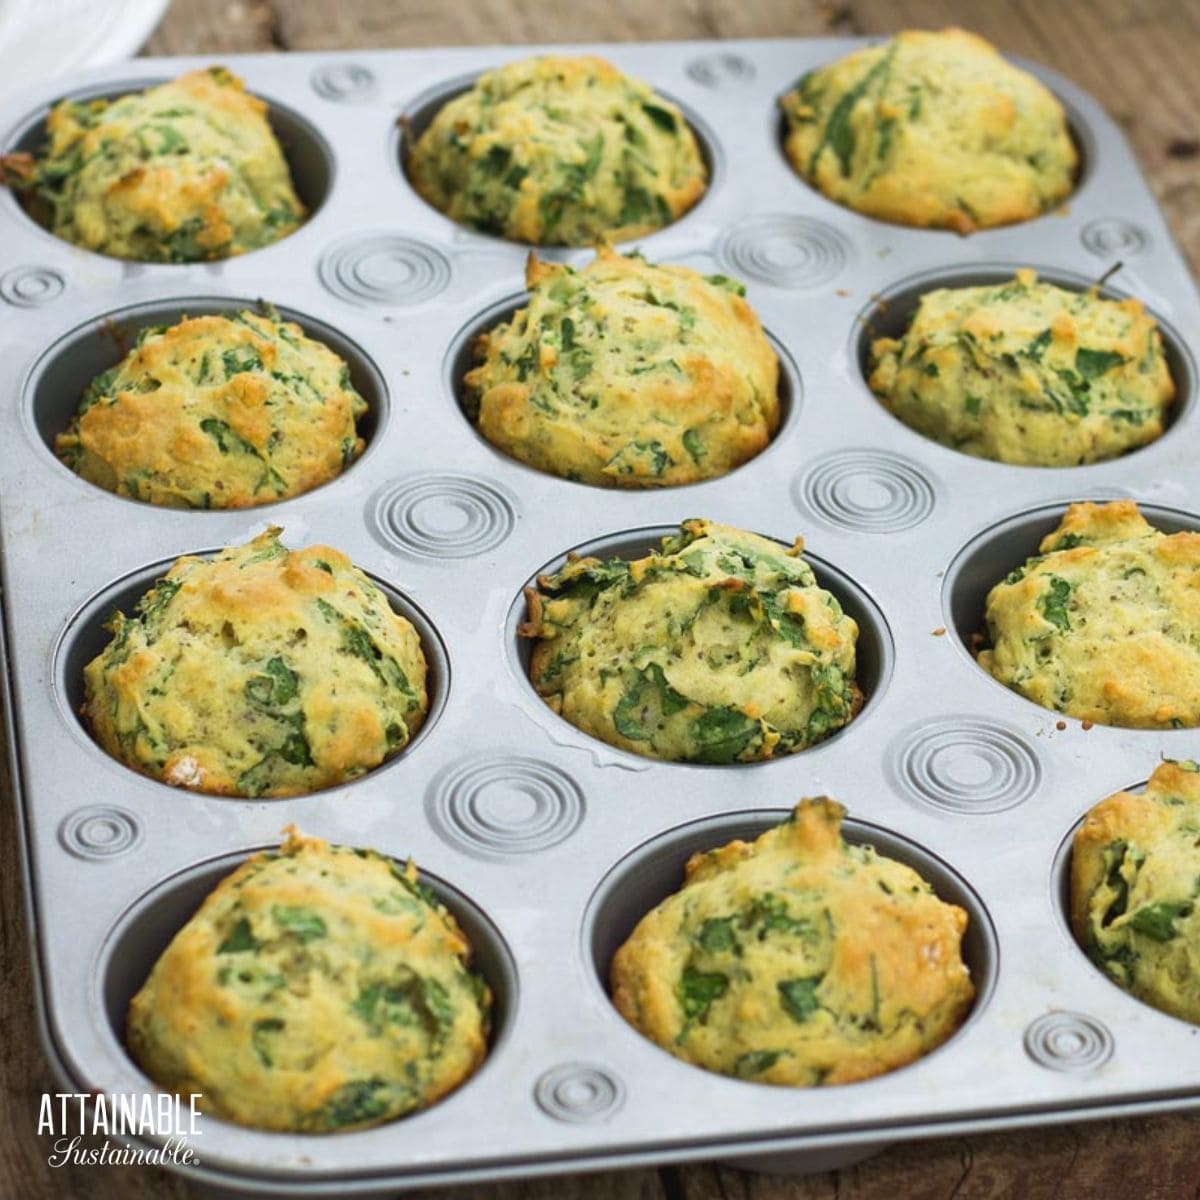 kale muffins in a muffin tin after baking.